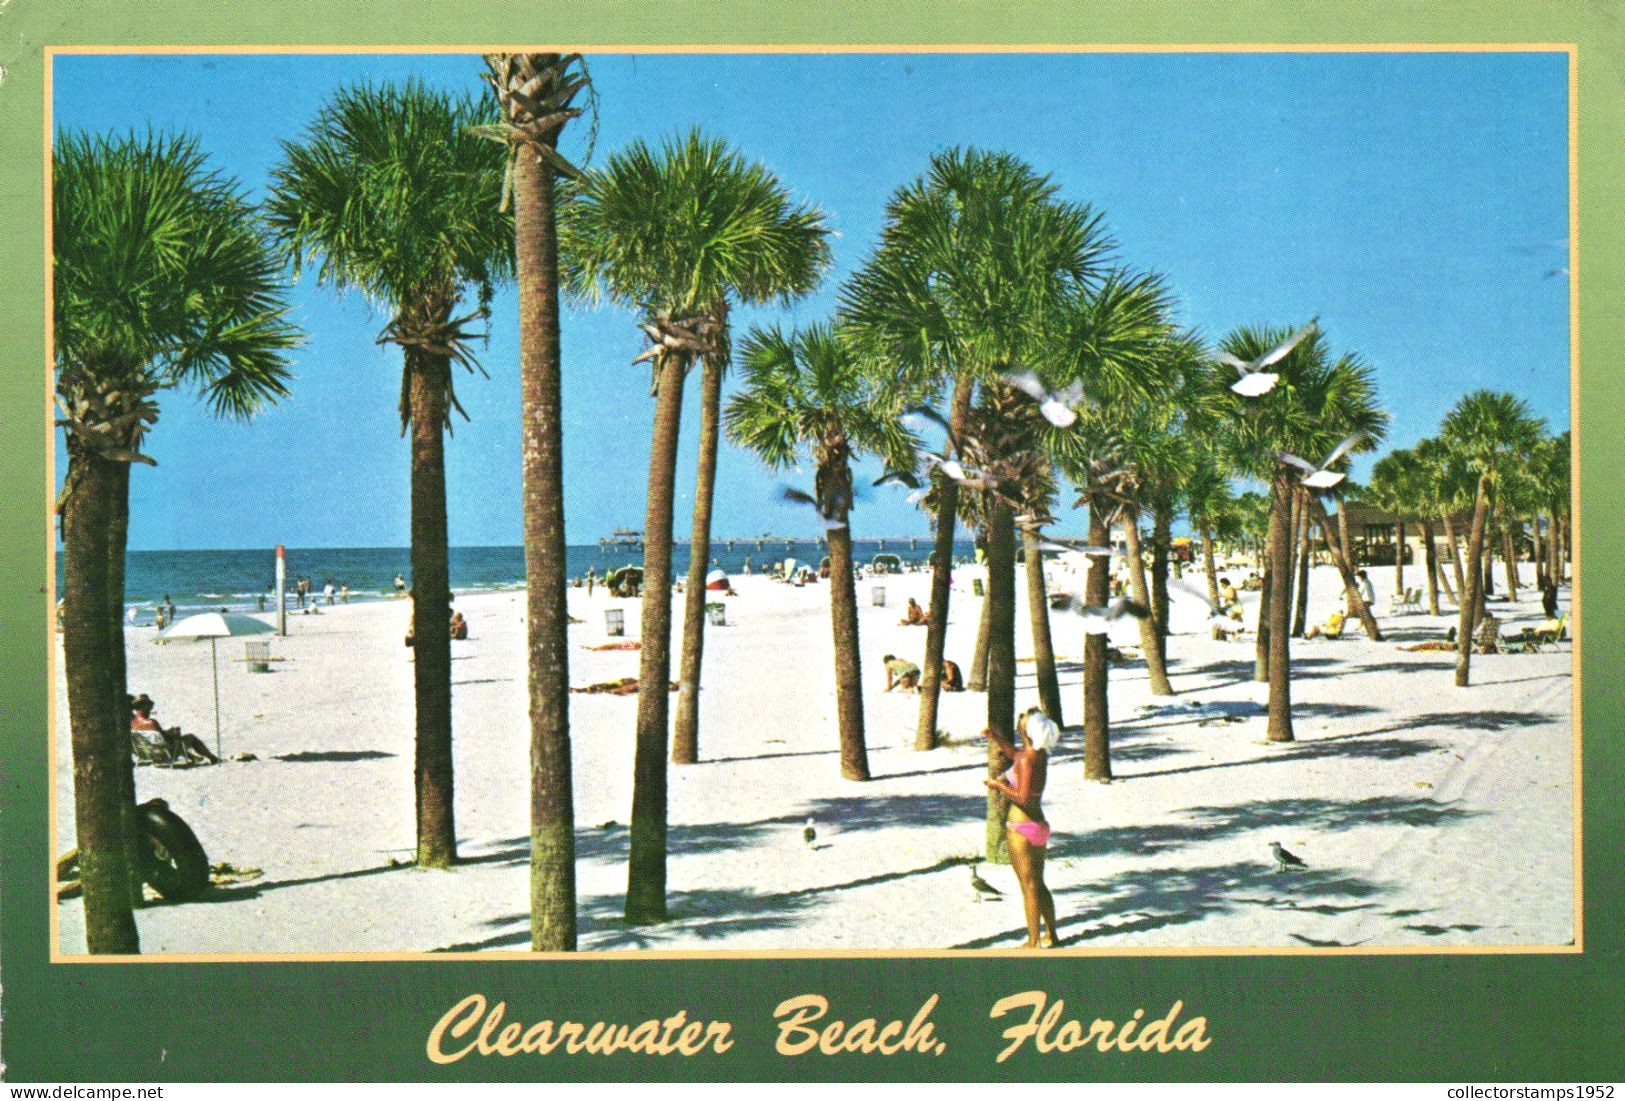 CLEARWATER BEACH, FLORIDA, UMBRELLA, UNITED STATES - Clearwater